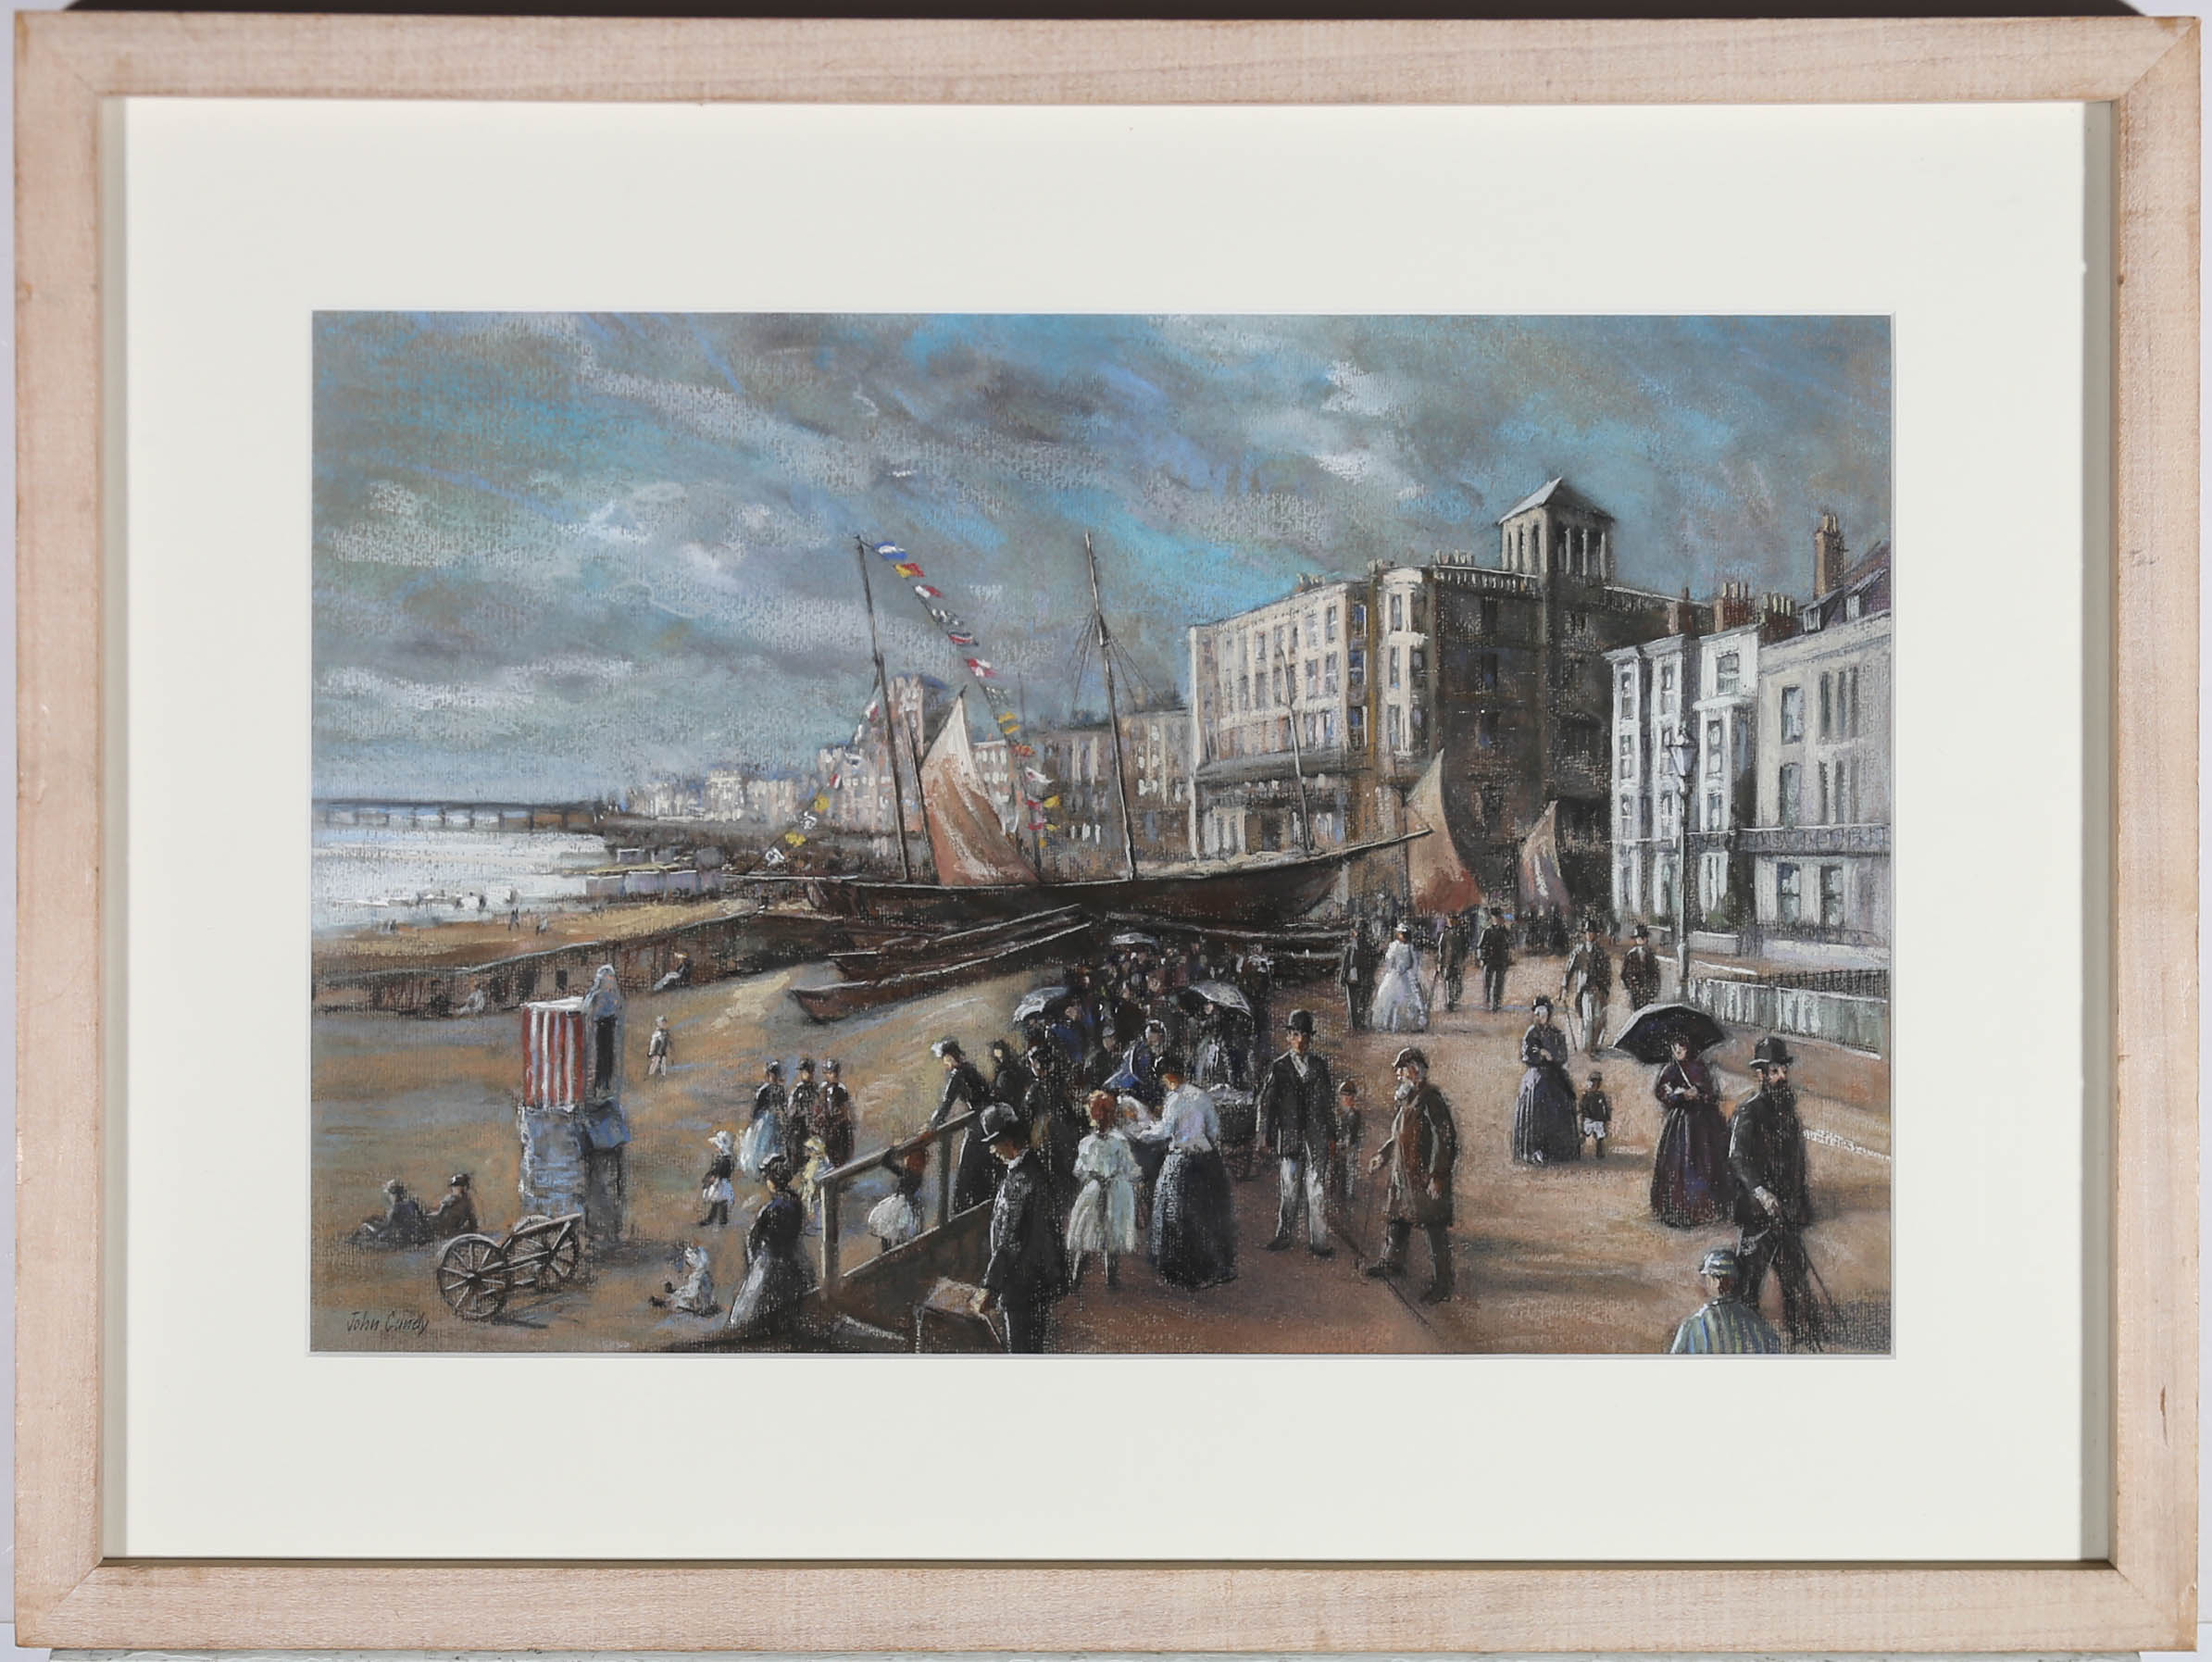 This very fine pastel study by John Cundy takes you back in time to a joyous scene from the Victorian period. Crowds of formally dressed beach goers can be seen in the centre of the composition gathering round the sandy amphitheatre, in anticipation